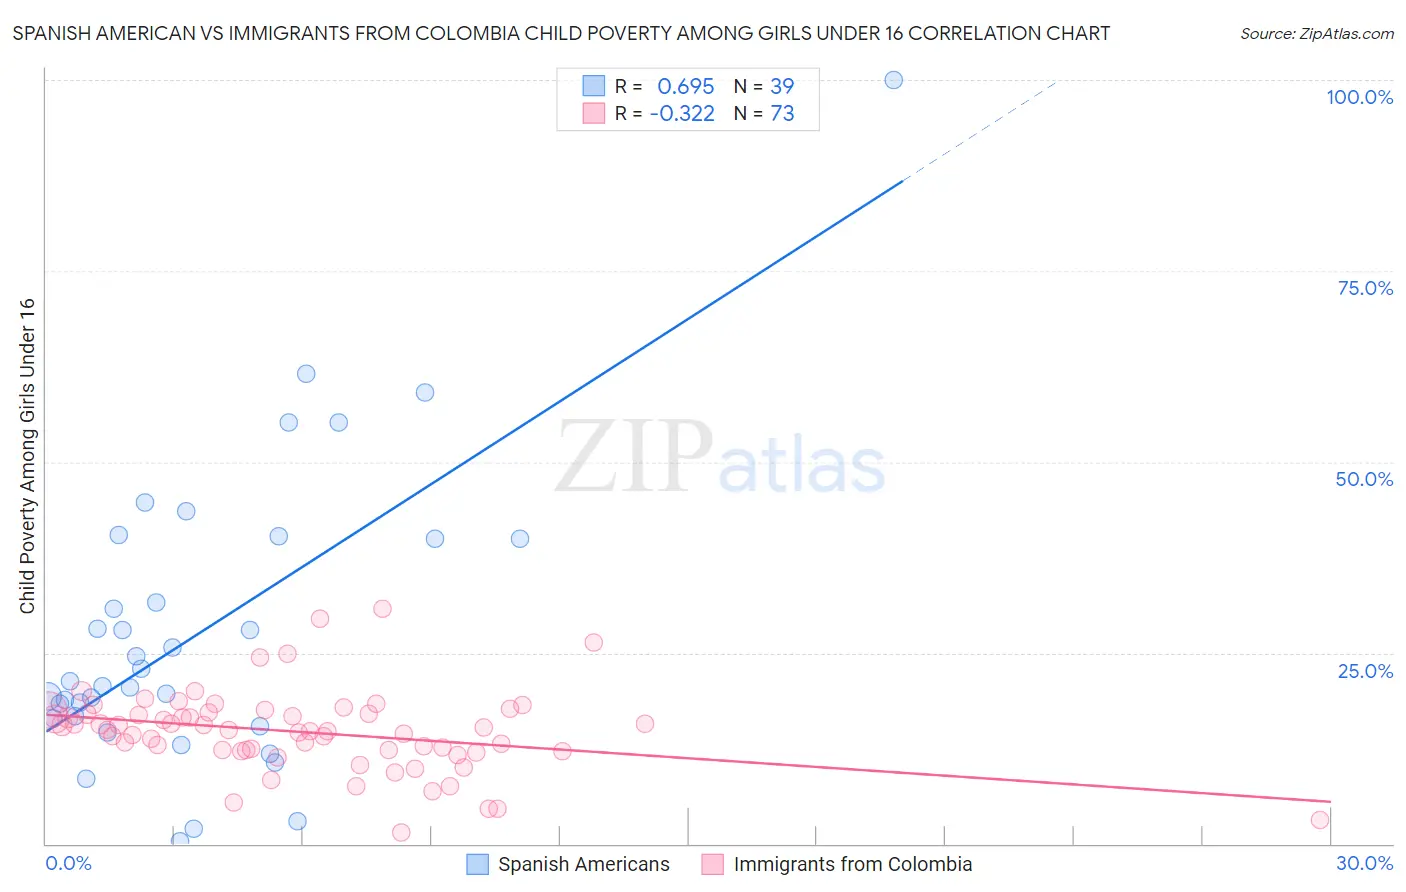 Spanish American vs Immigrants from Colombia Child Poverty Among Girls Under 16